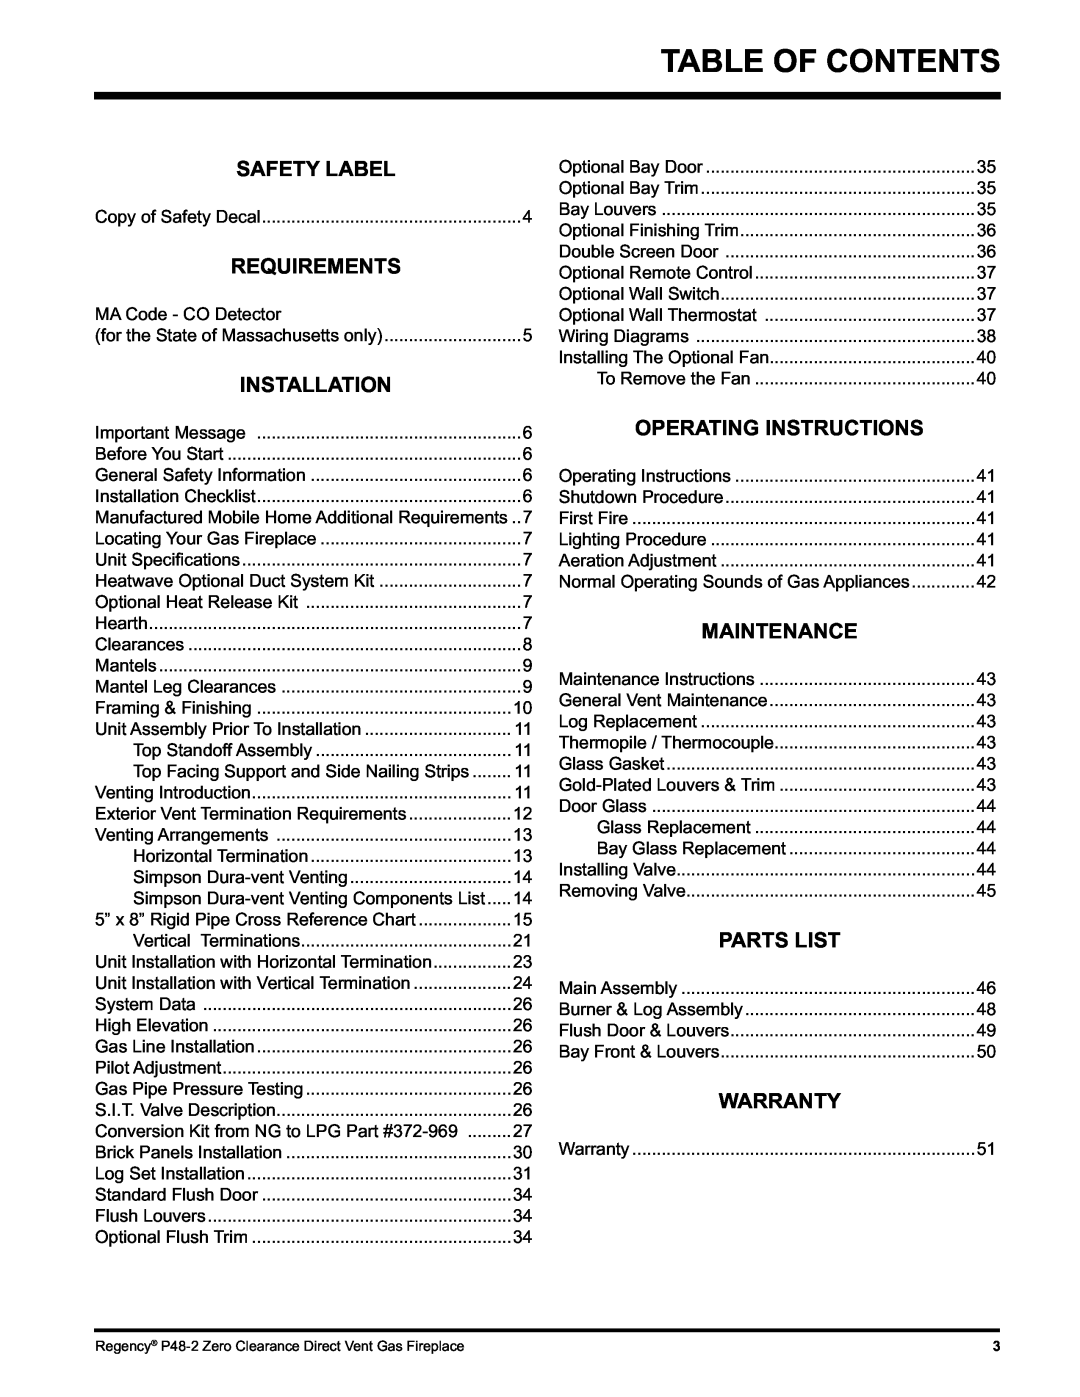 Regency P48-2 Table Of Contents, Safety Label, Requirements, Installation, Operating Instructions, Maintenance, Parts List 